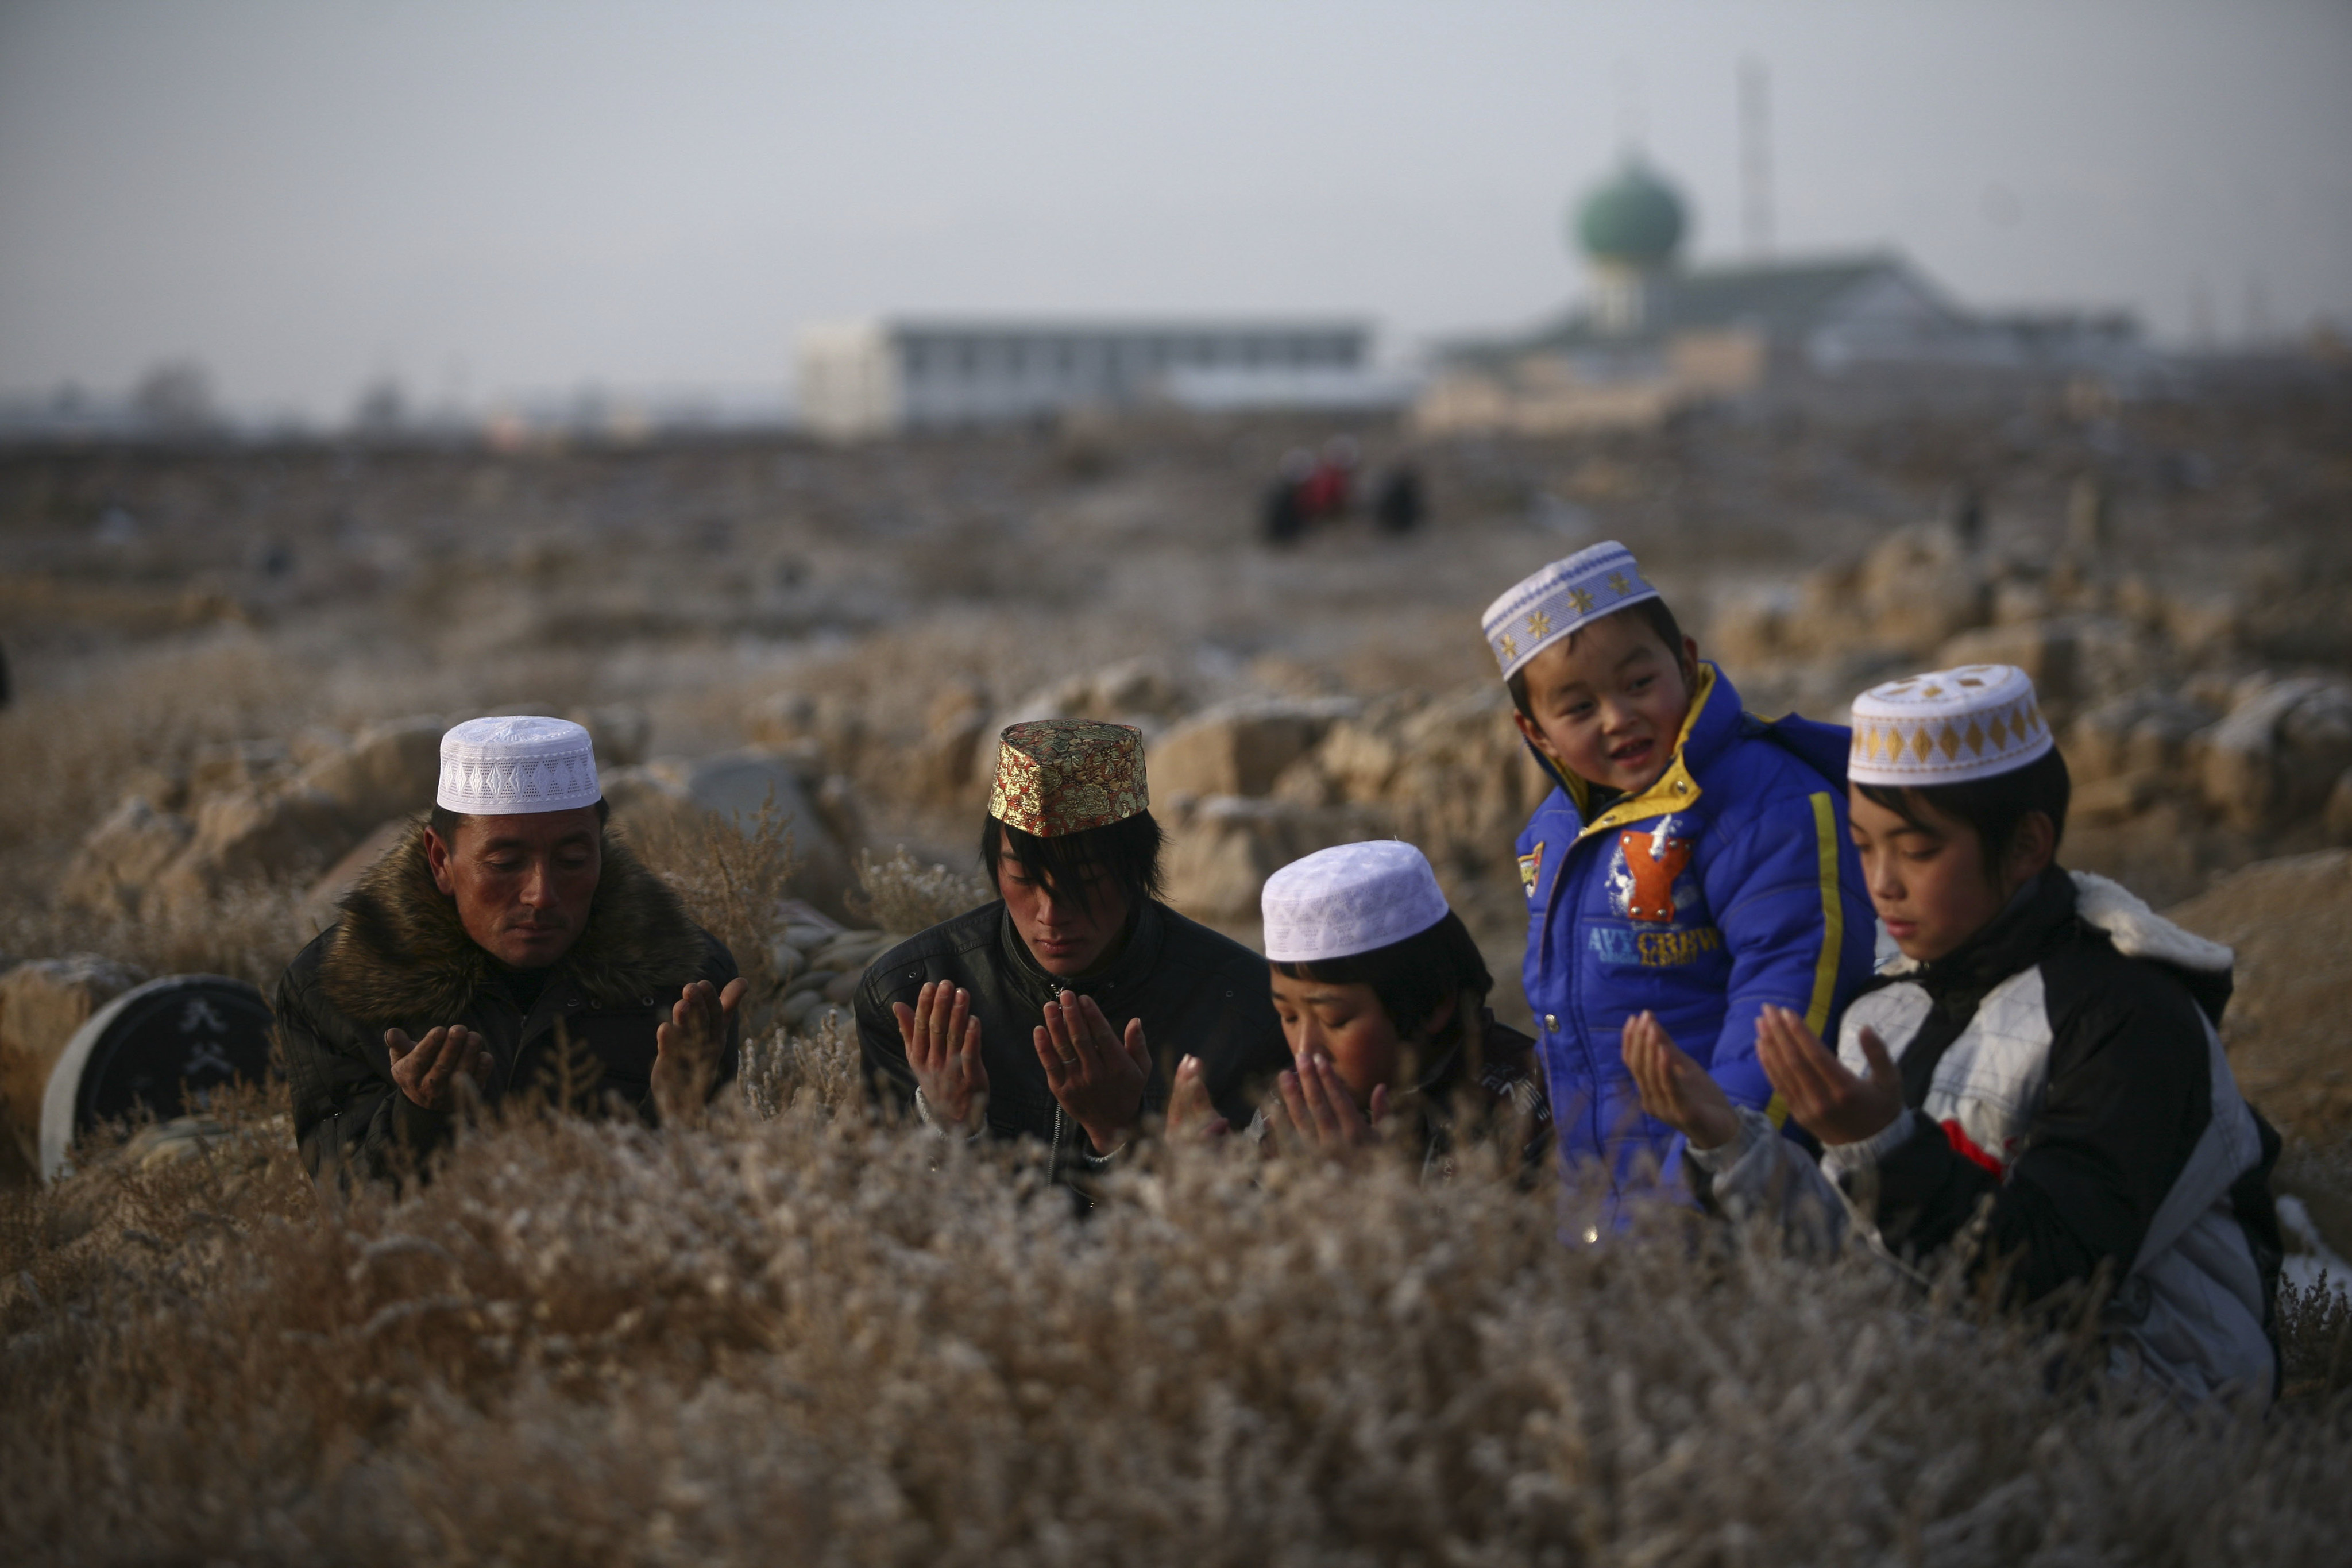 Chinese Muslims pray in the Ningxia Hui autonomous region in China. Photo: Getty Images